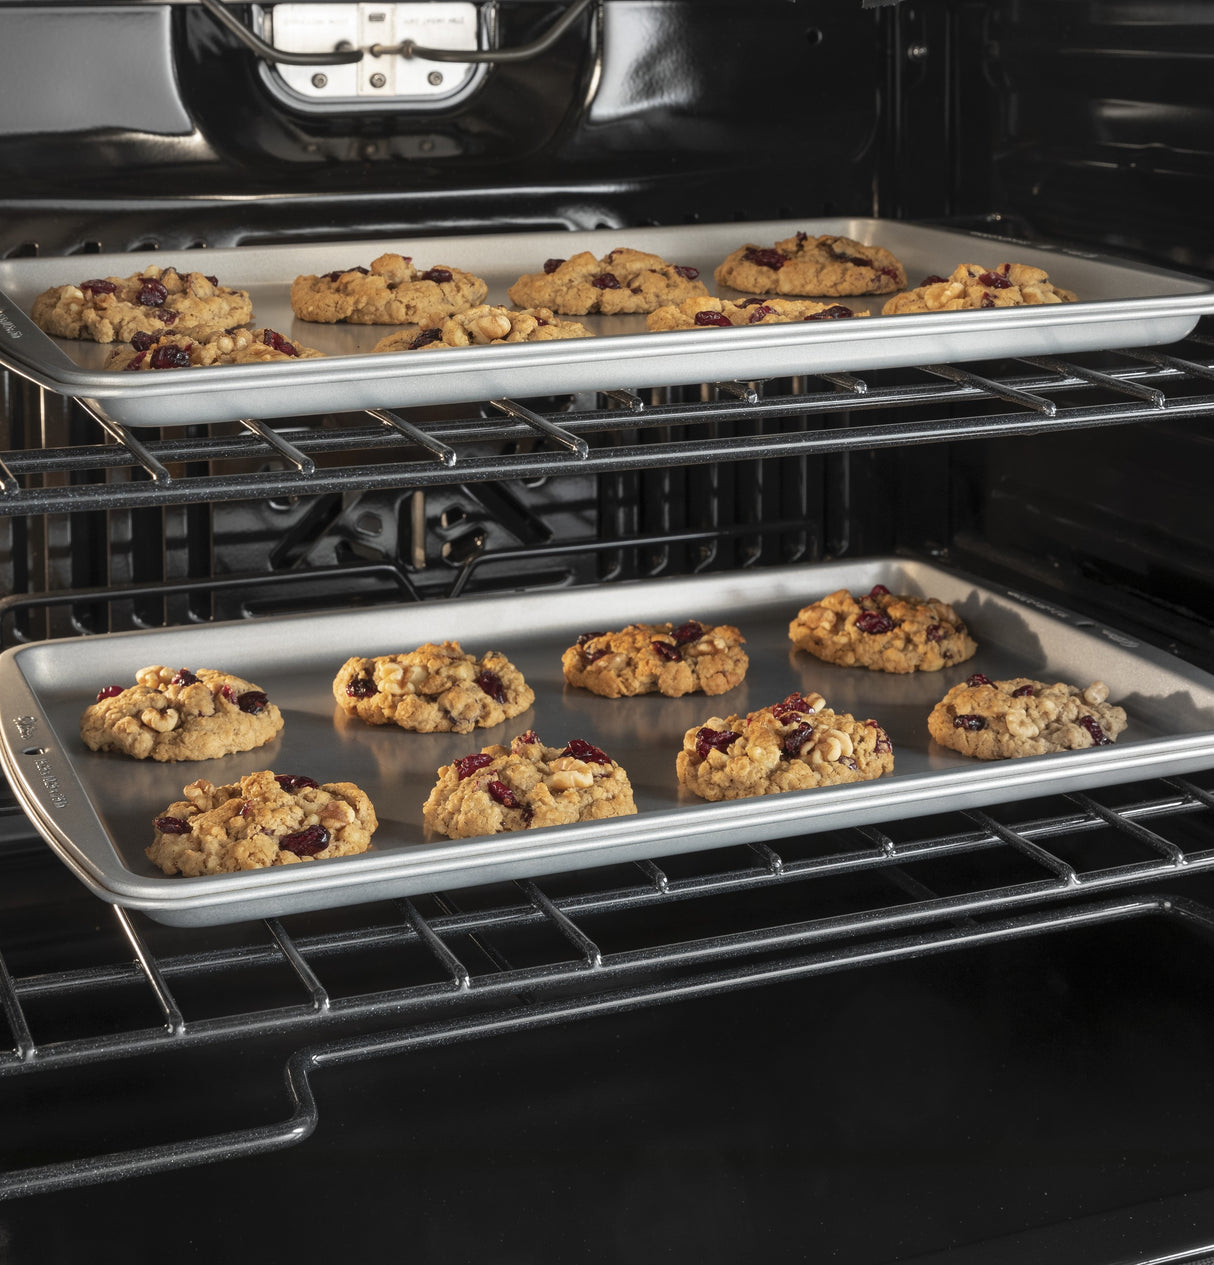 GE(R) 30" Smart Built-In Self-Clean Convection Double Wall Oven with Never Scrub Racks - (JTD5000DNBB)